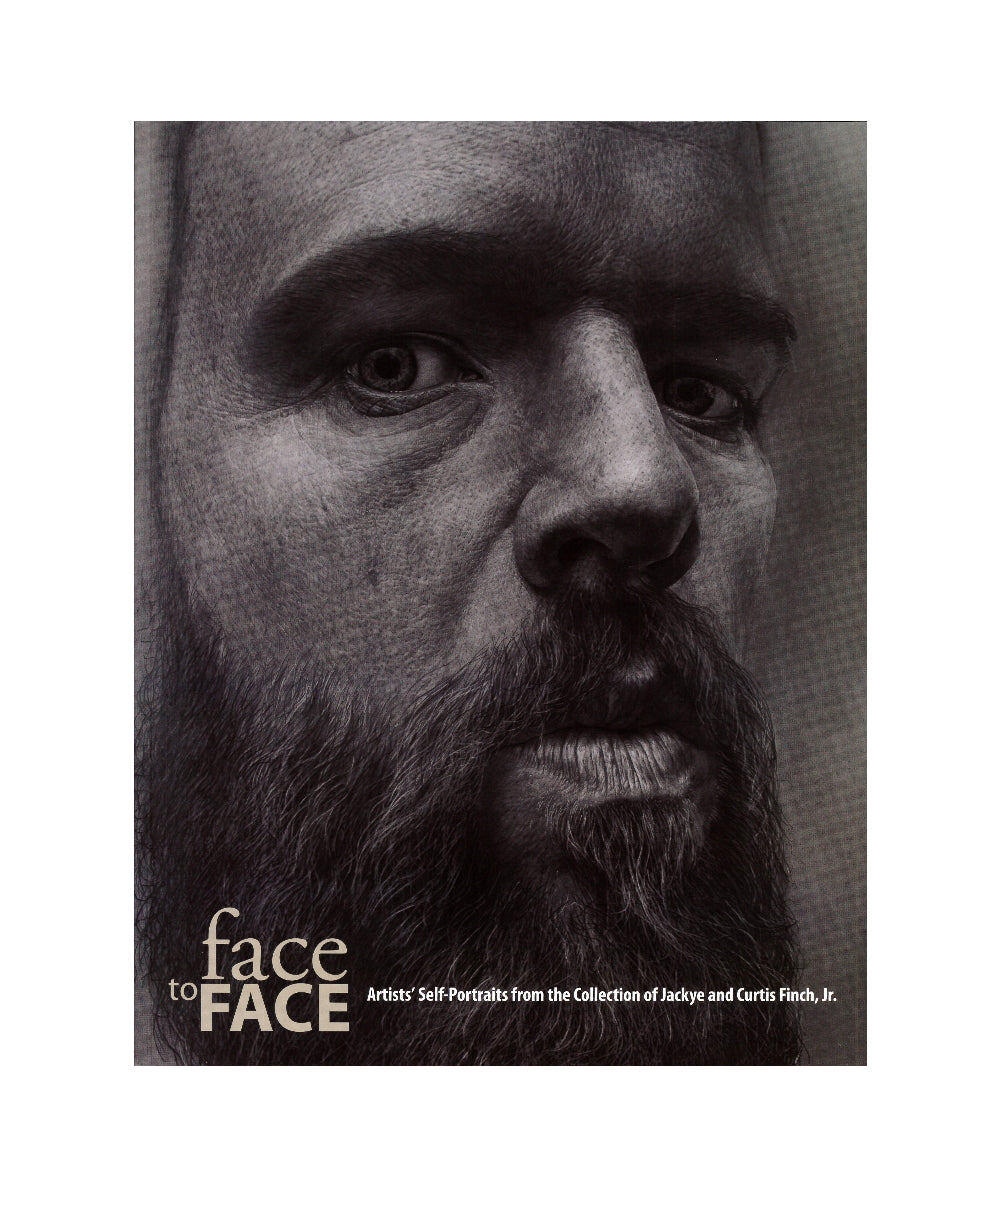 Face to Face: Artists' Self-Portraits from the Collection of Jackye and Curtis Finch, Jr.